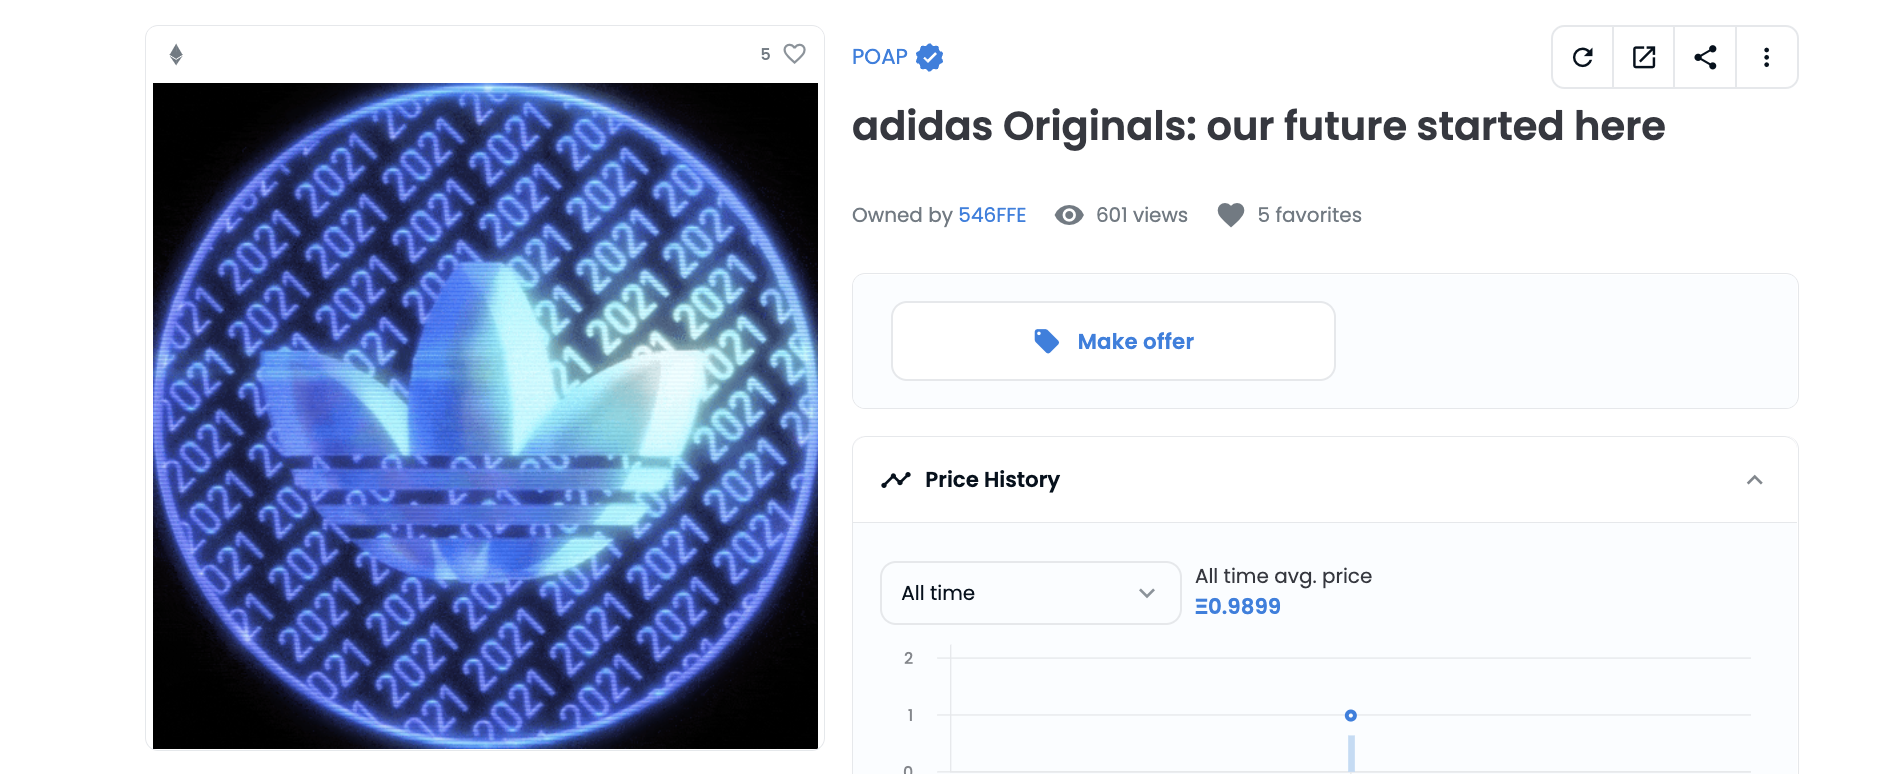 First Adidas POAP Entry into the NFT Space